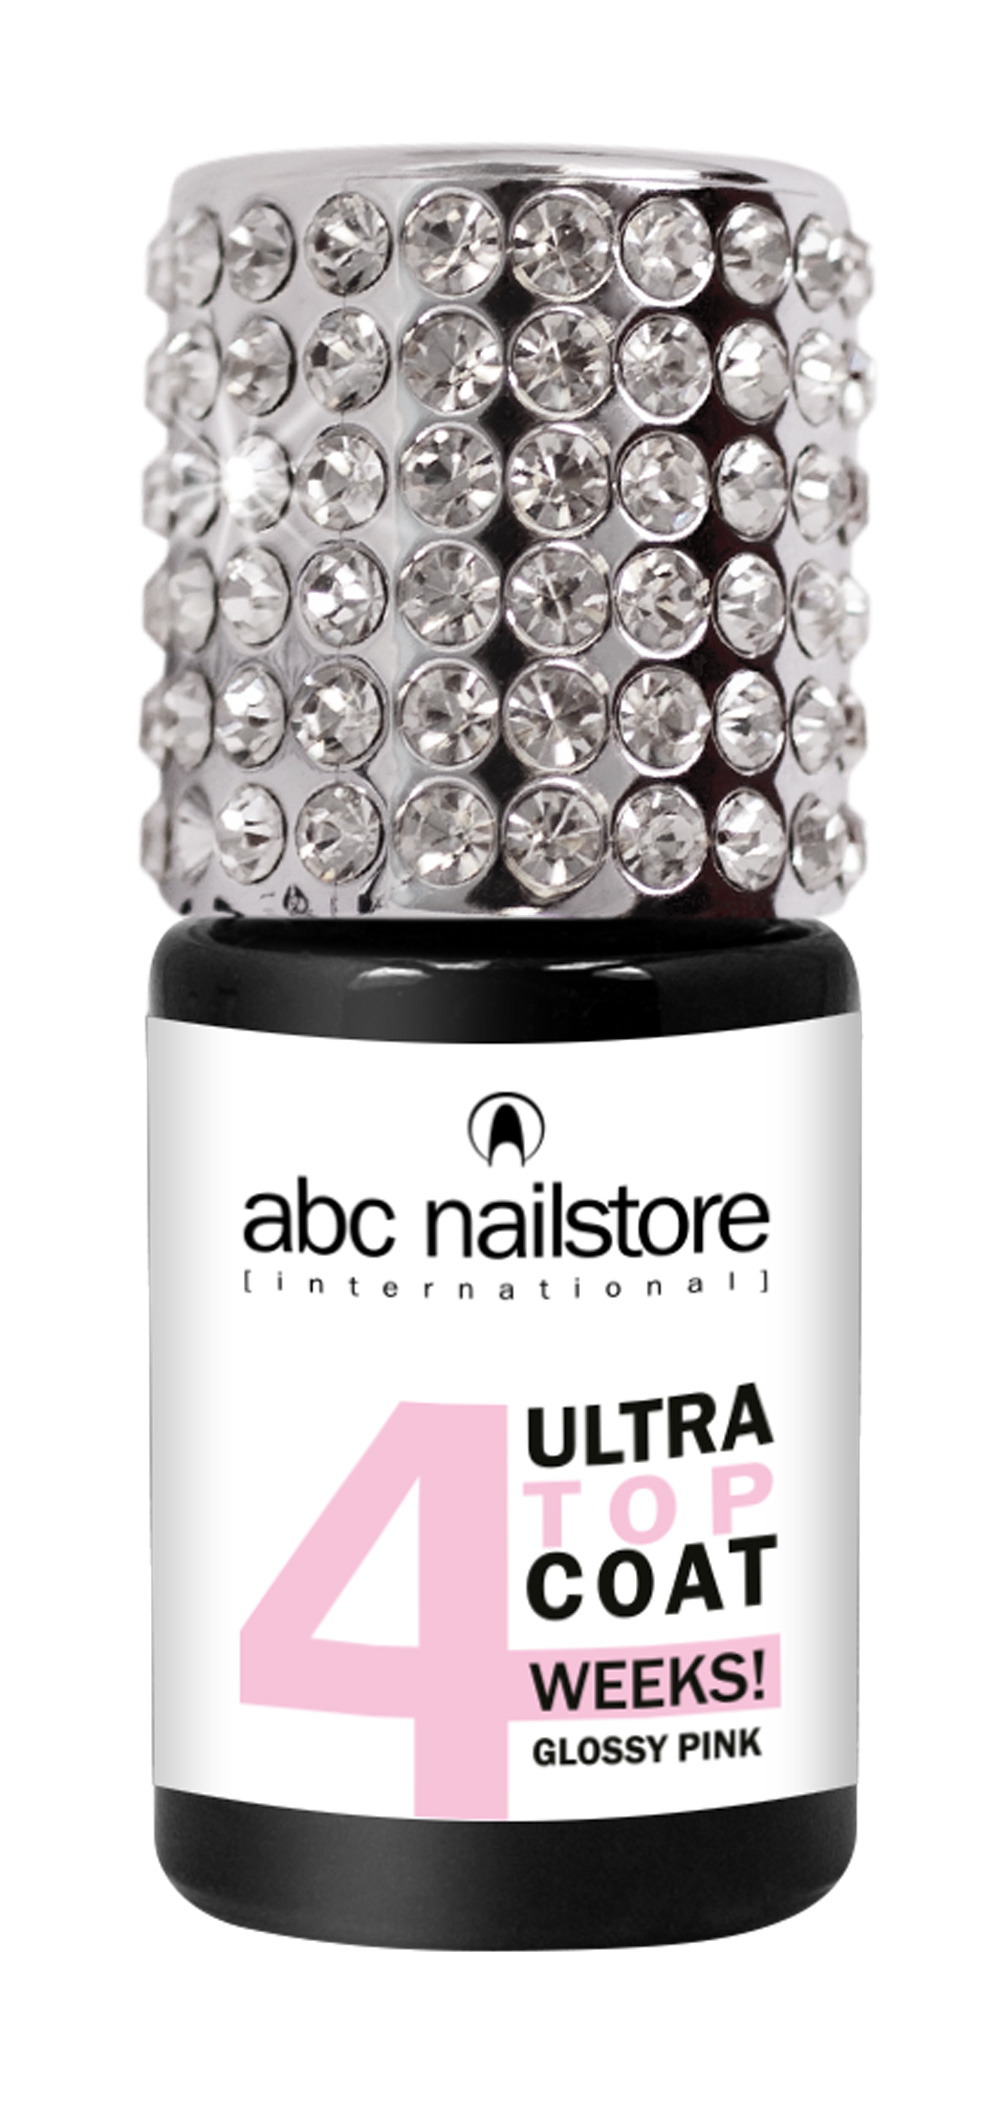 abc nailstore 3DLAC 4WEEKS Ultra Top Coat "glossy pink", 8ml